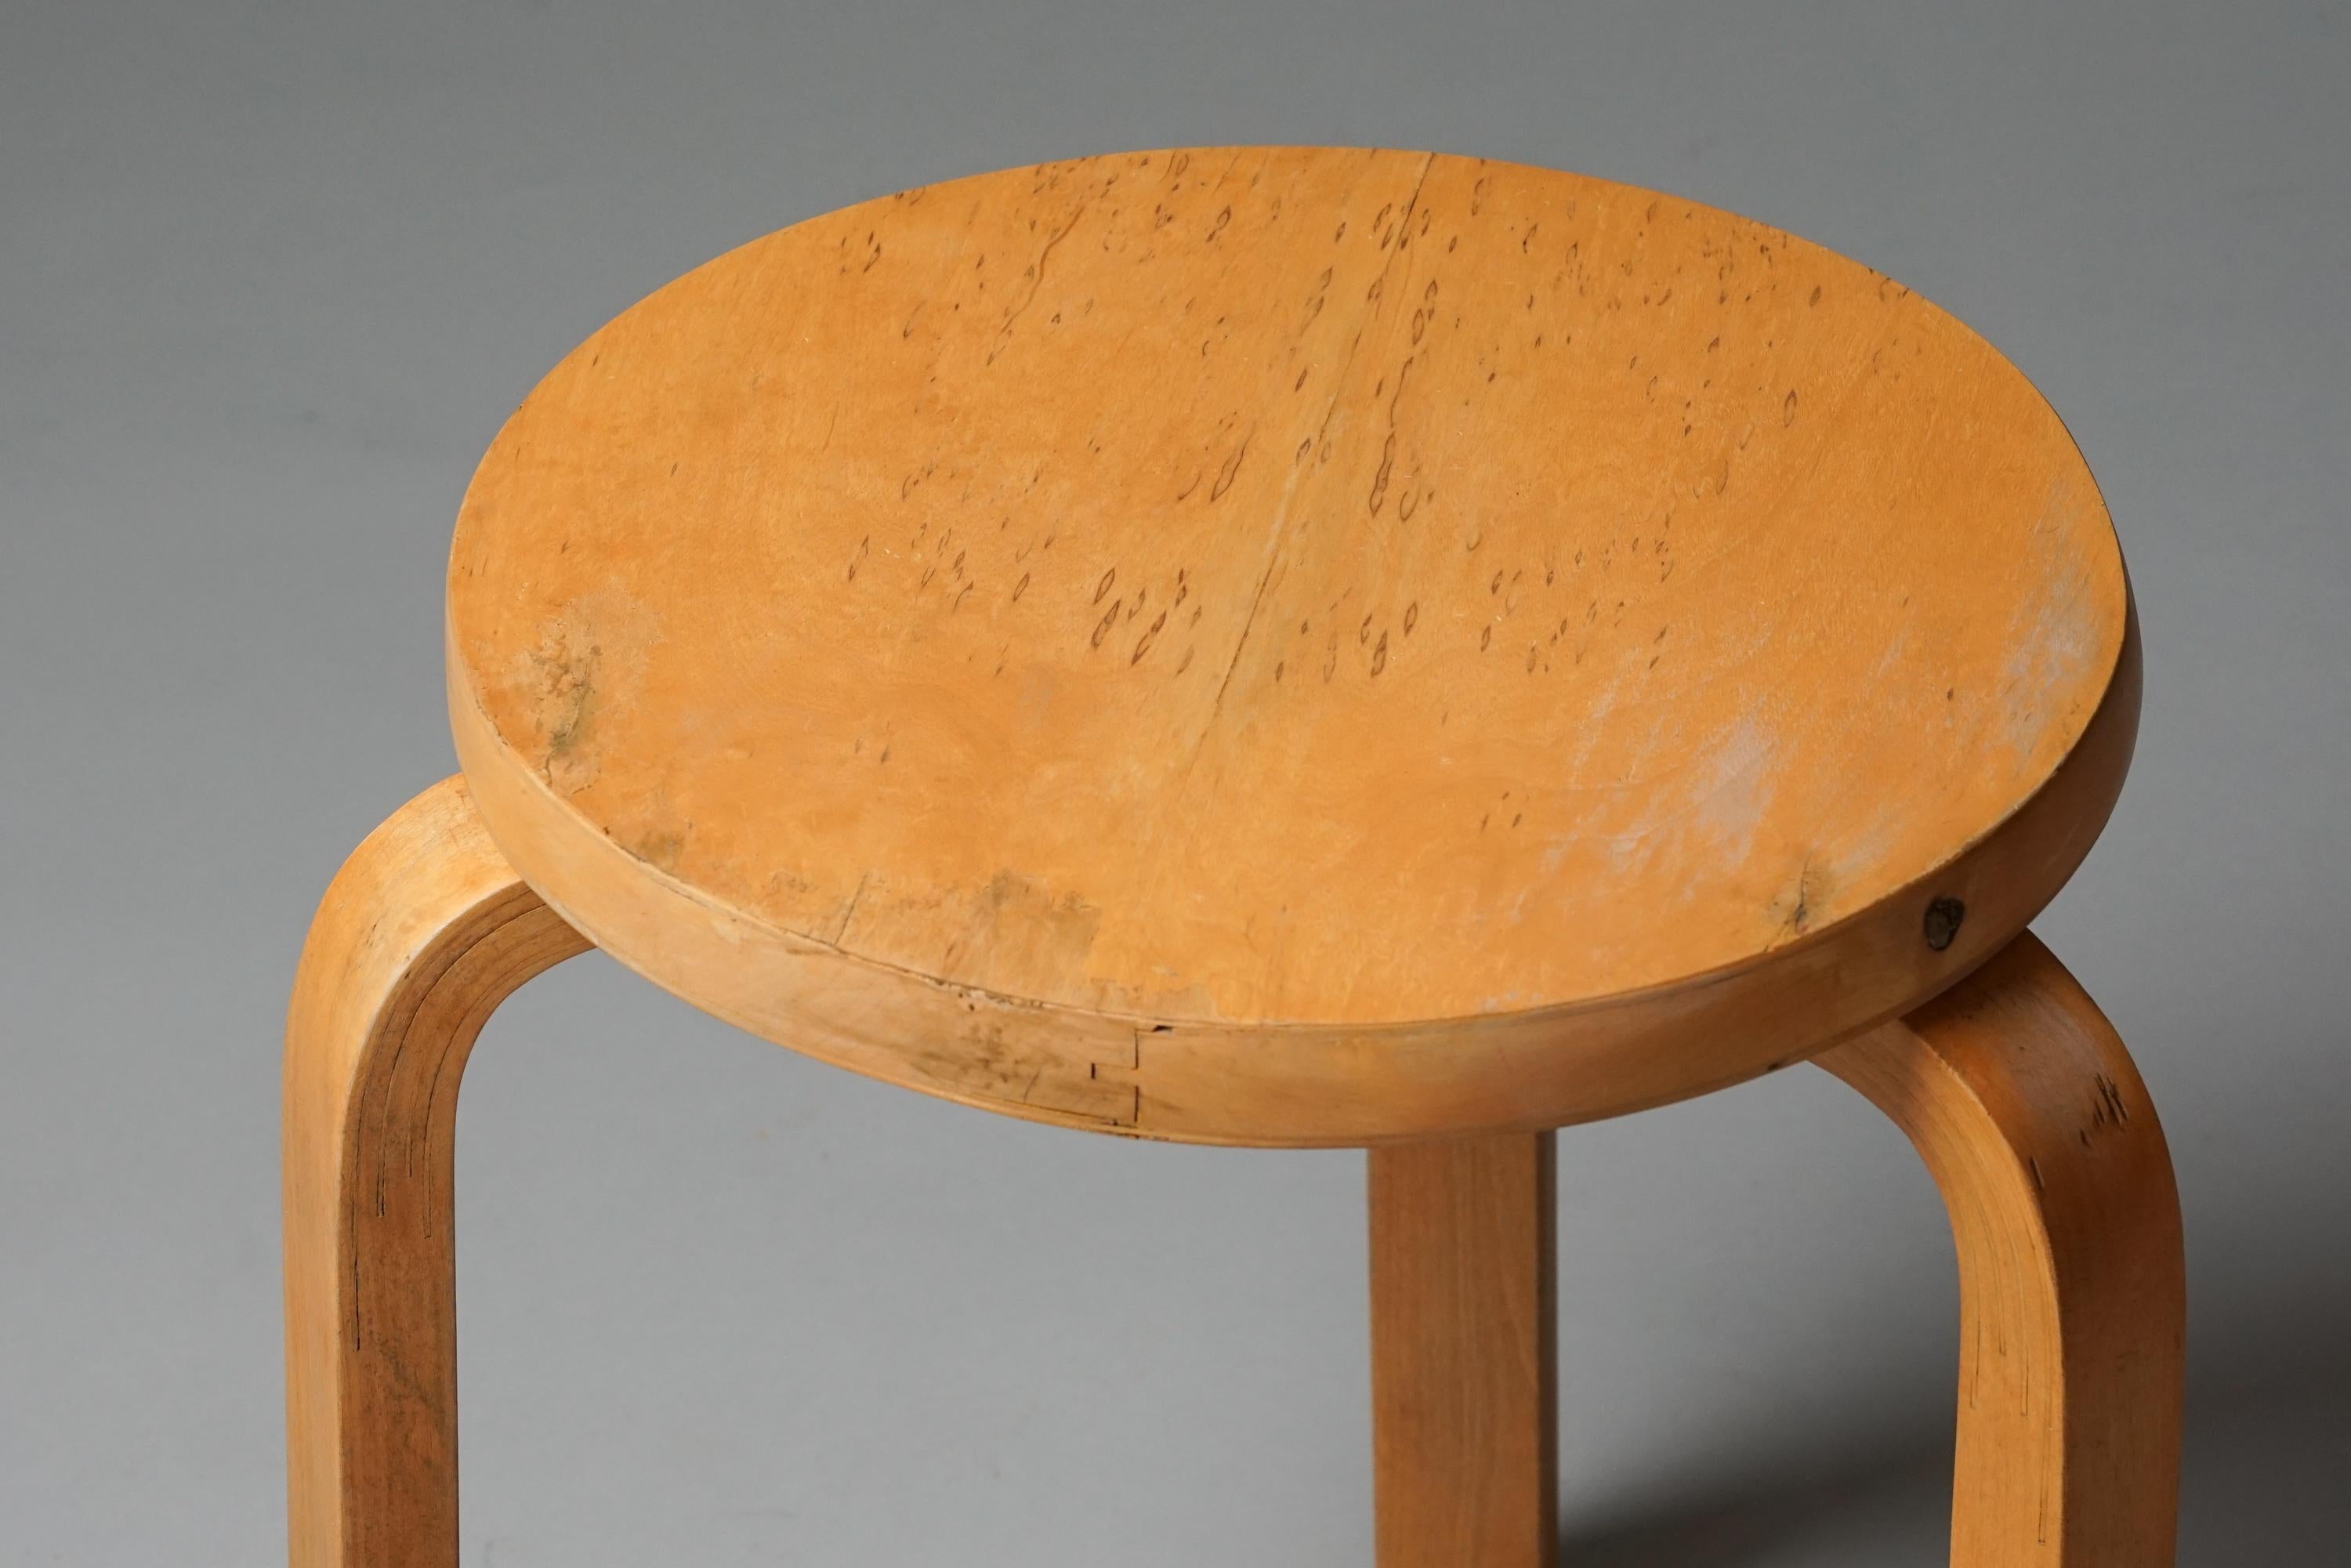 Rare stool model 60, designed by Alvar Aalto, manufactured by Oy Huonekalu- ja Rakennustyötehdas Ab, 1930/1940s. Birch frame, rare carelian birch top. Good vintage condition, patina consistent with age and use. 

Alvar Aalto (1898-1976) is probably